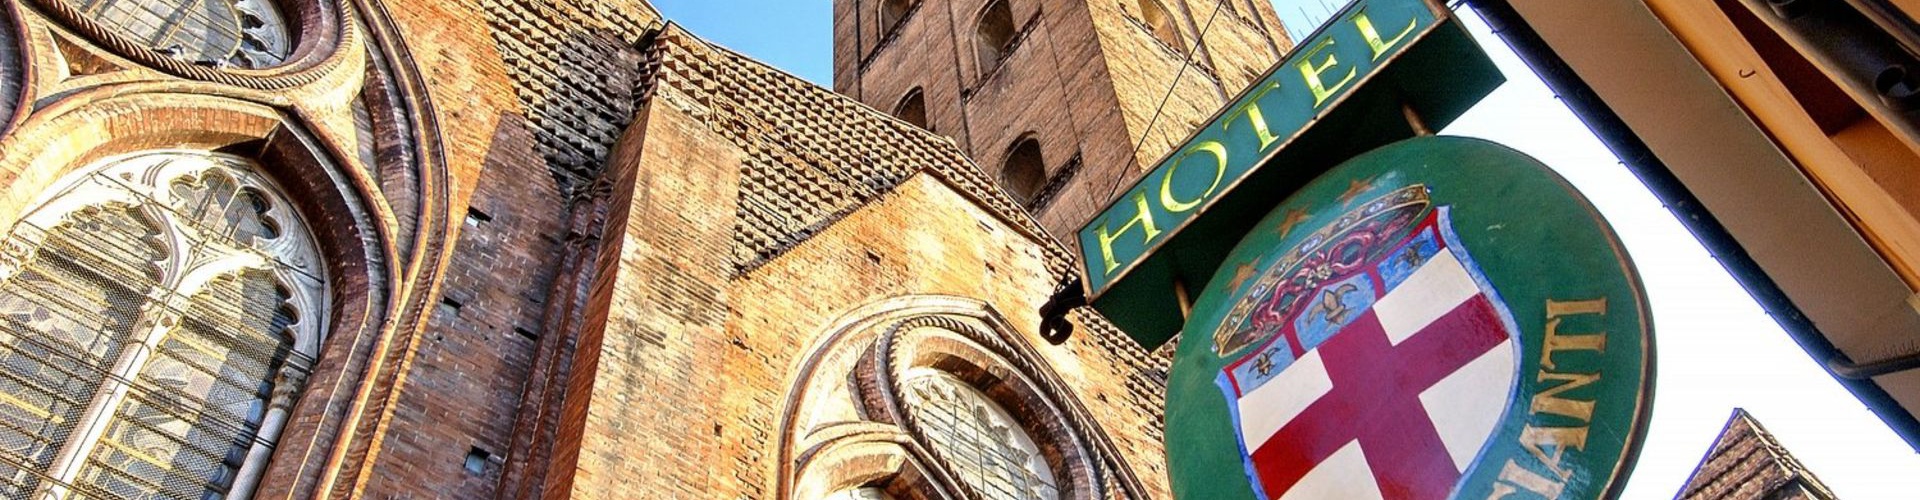 Commercianti Hotel rediseño - Bologne - The Etruscan city: the other face of Bologna